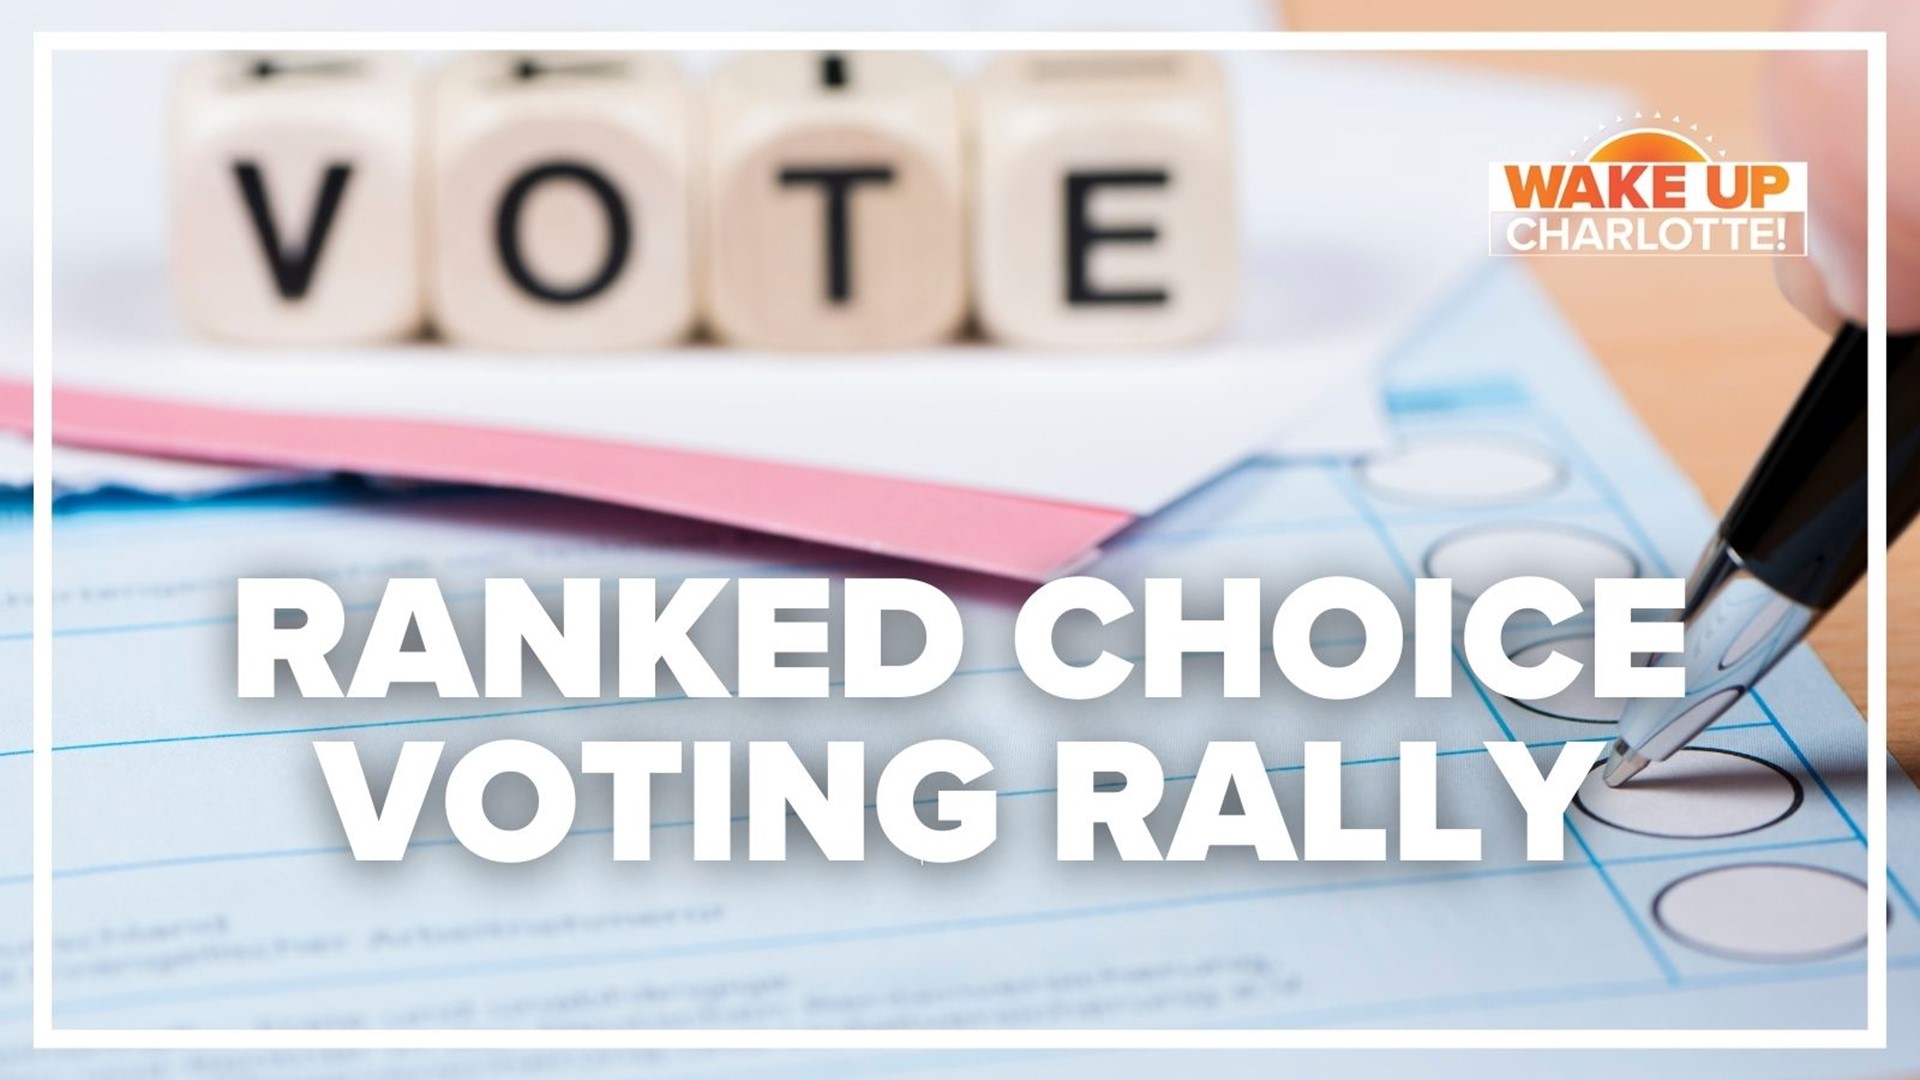 A group heading to Charlotte is encouraging people to support ranked choice voting in North Carolina.